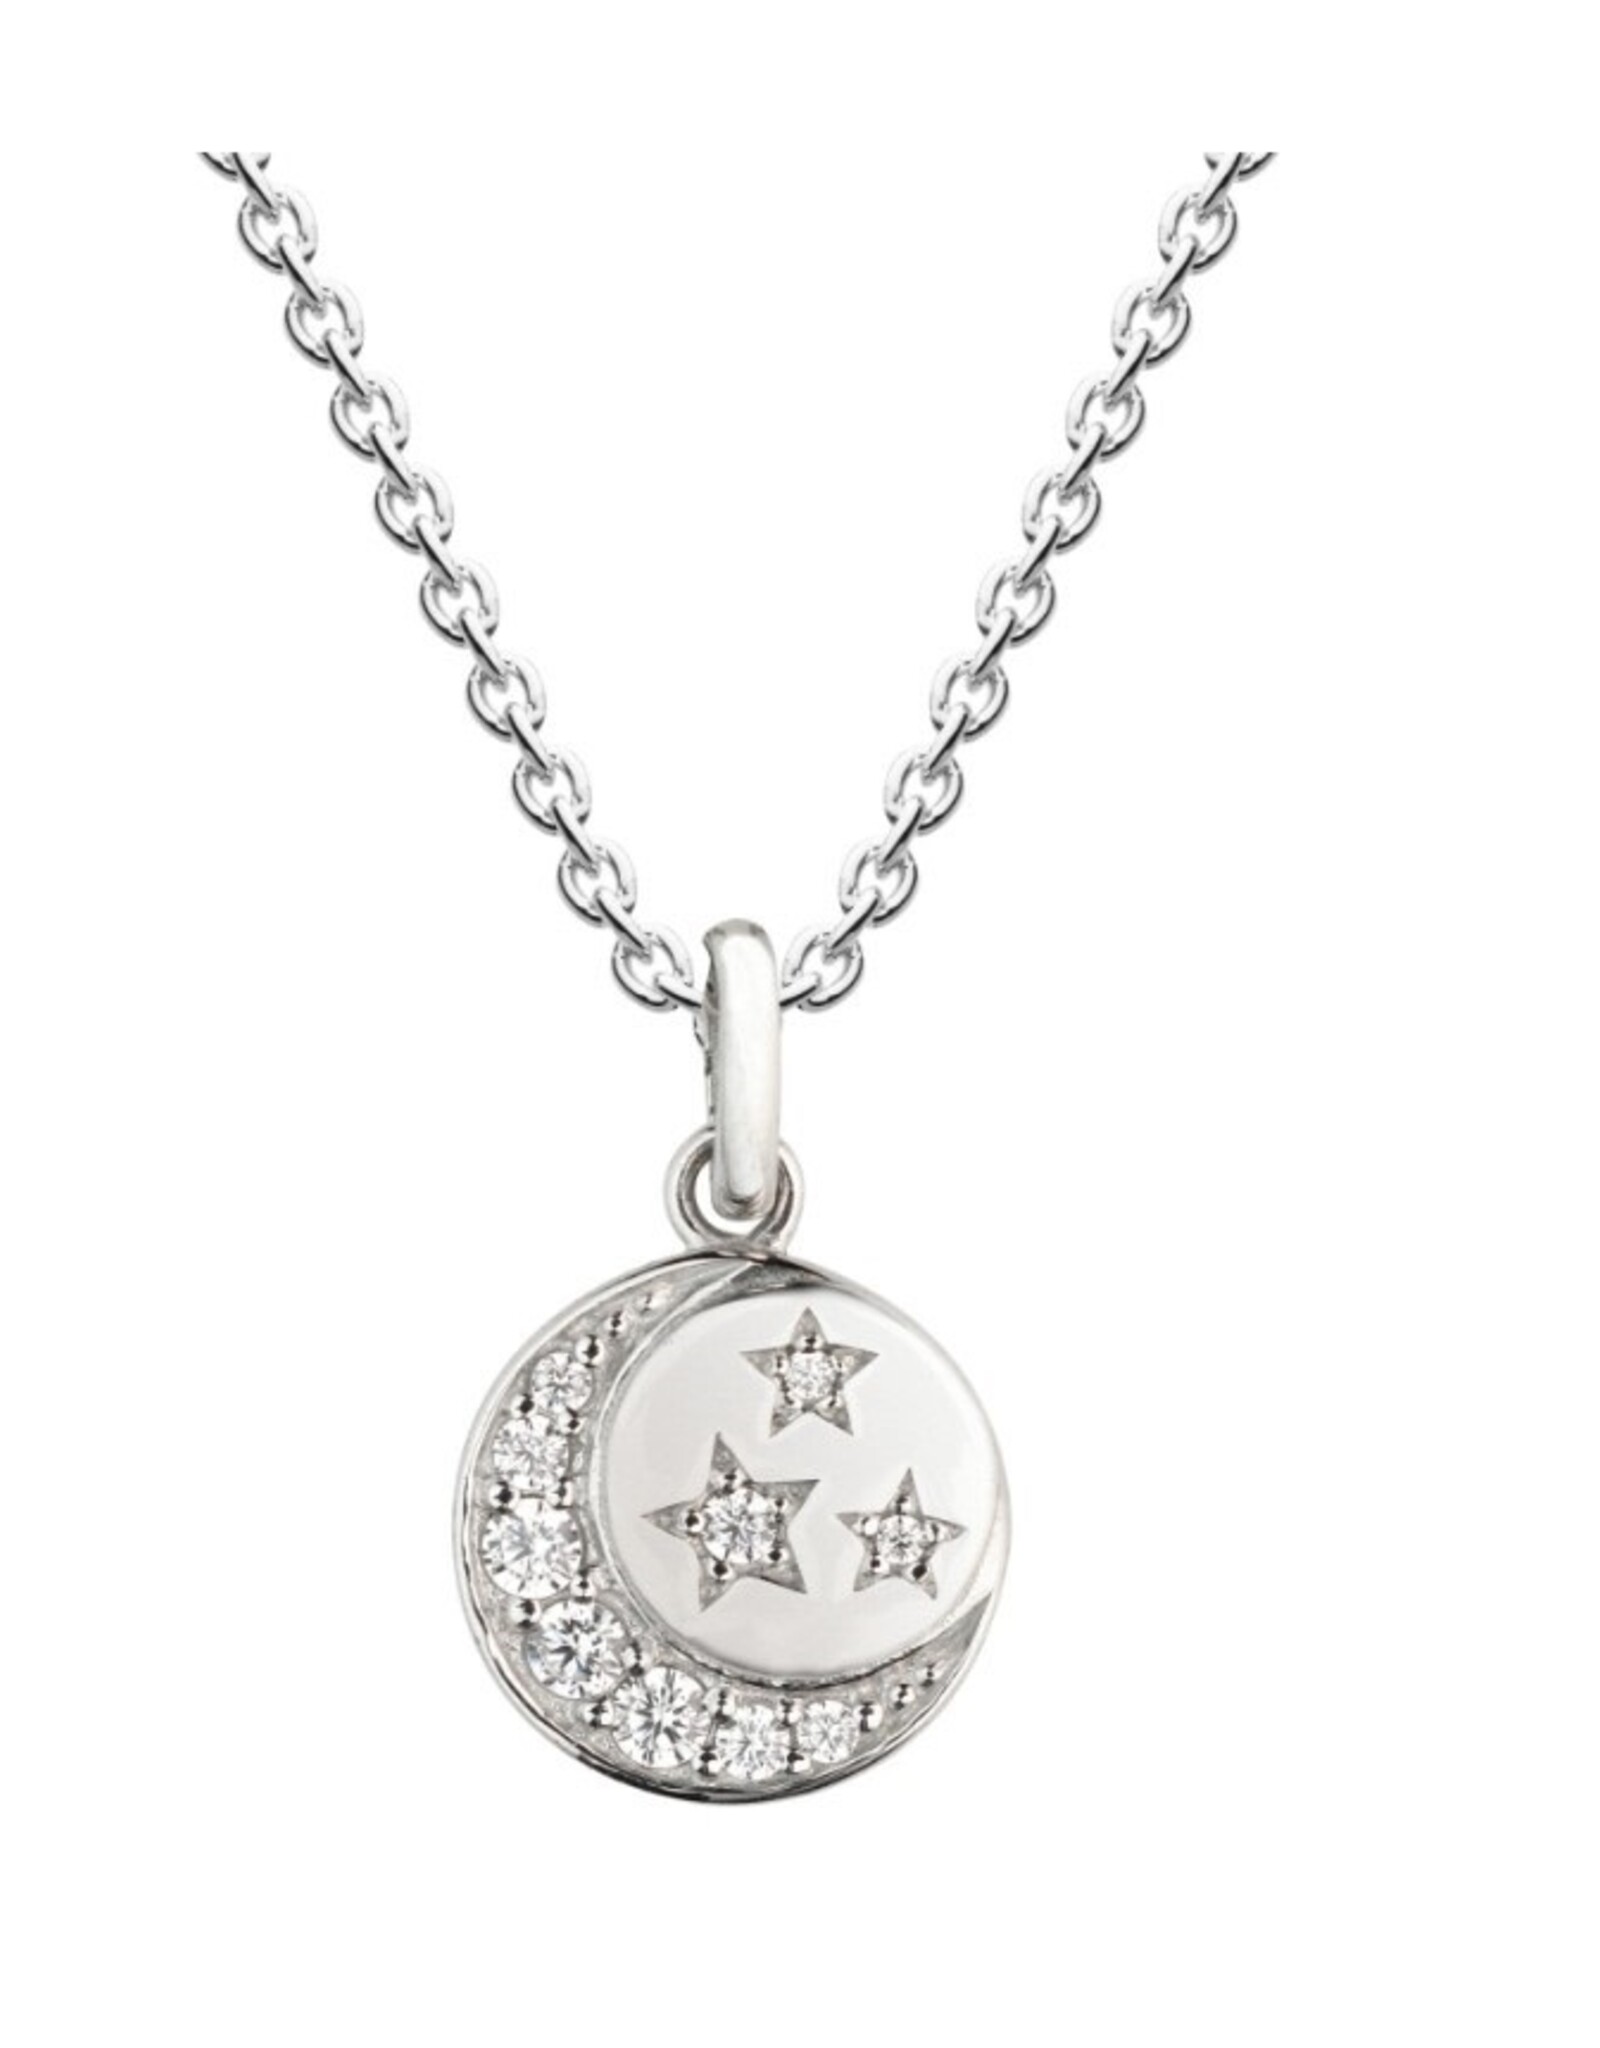 Kit Heath MINI STAR CRESCENT MOON DISC NECKLACE - sterling silver